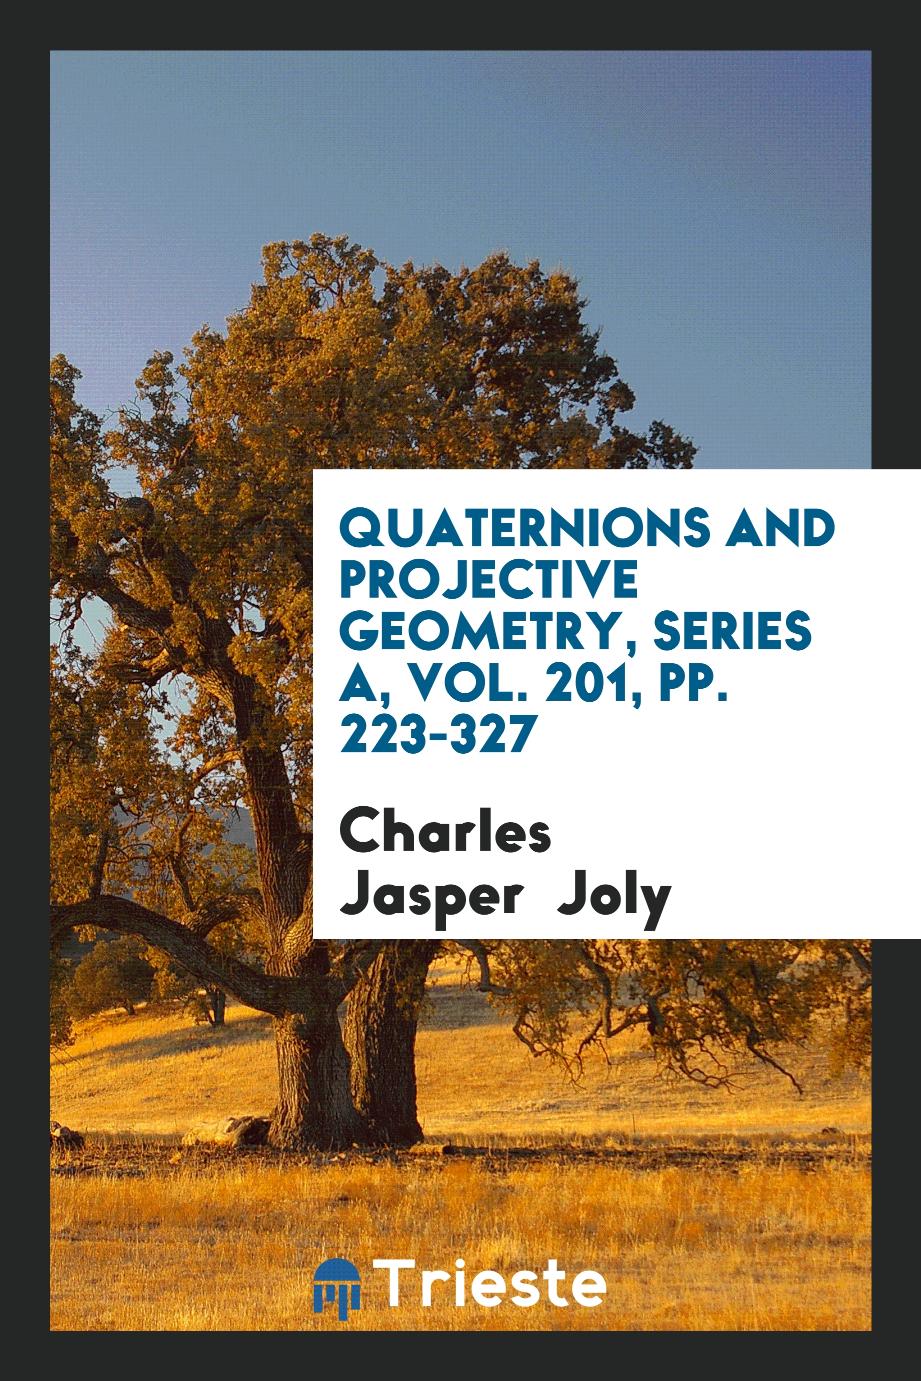 Quaternions and Projective Geometry, Series A, Vol. 201, pp. 223-327